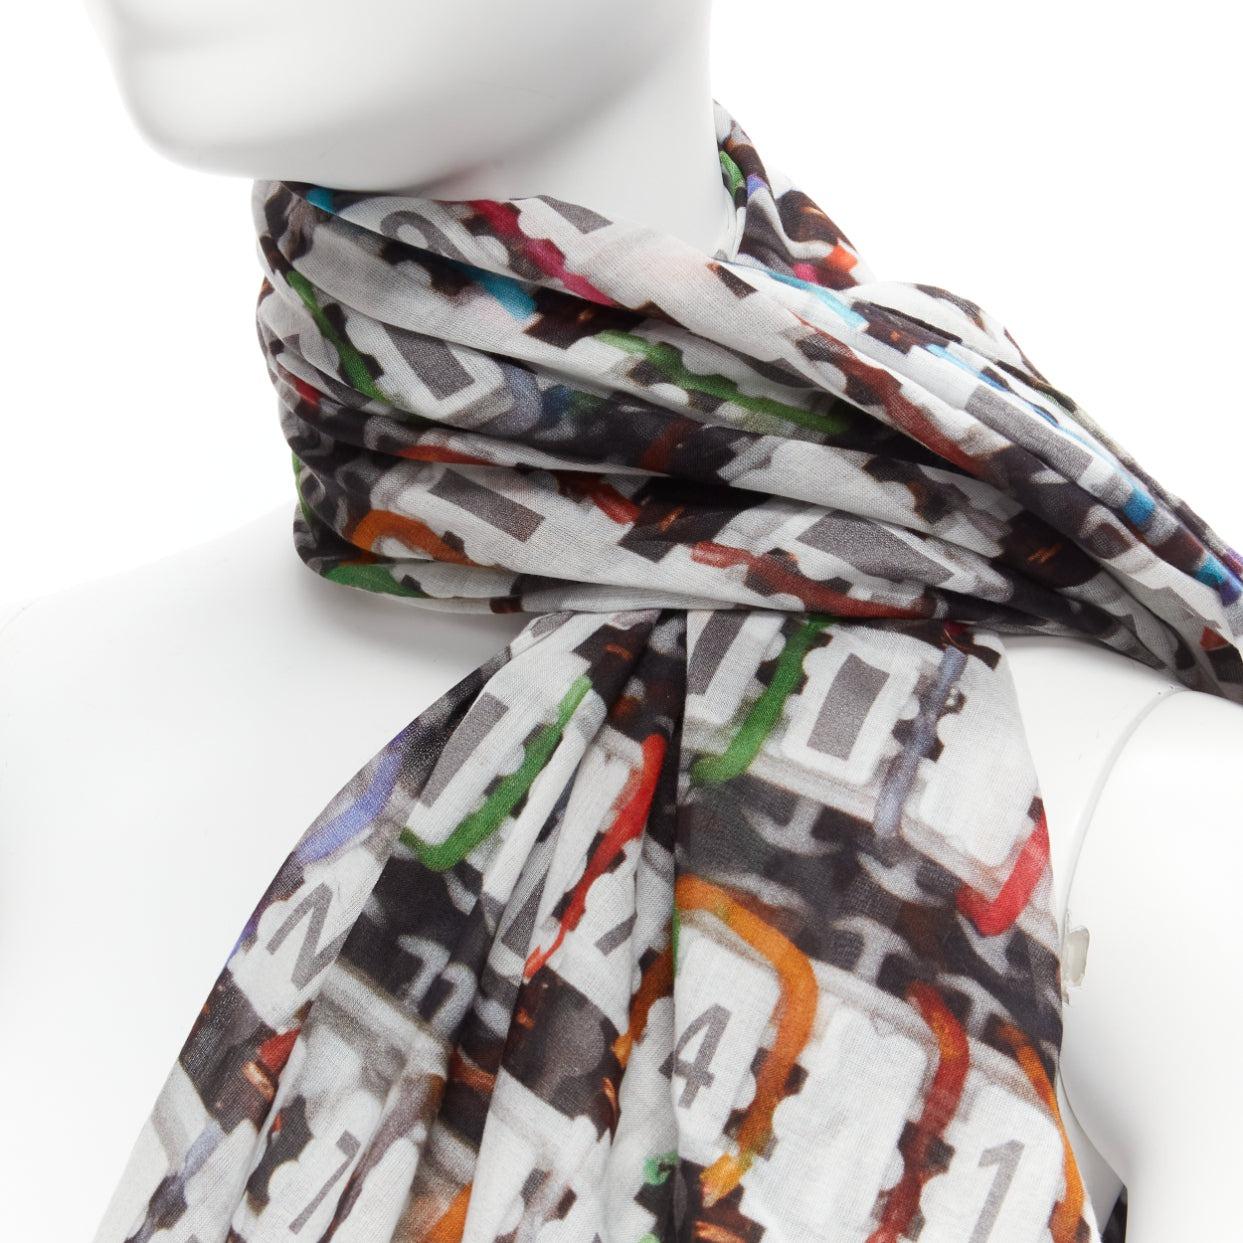 CHANEL multicolor 100% cotton CC logo data centre number print scarf
Reference: KEDG/A00262
Brand: Chanel
Designer: Karl Lagerfeld
Material: Cotton
Color: Multicolour
Pattern: Photographic Print
Made in: Italy

CONDITION:
Condition: Excellent, this